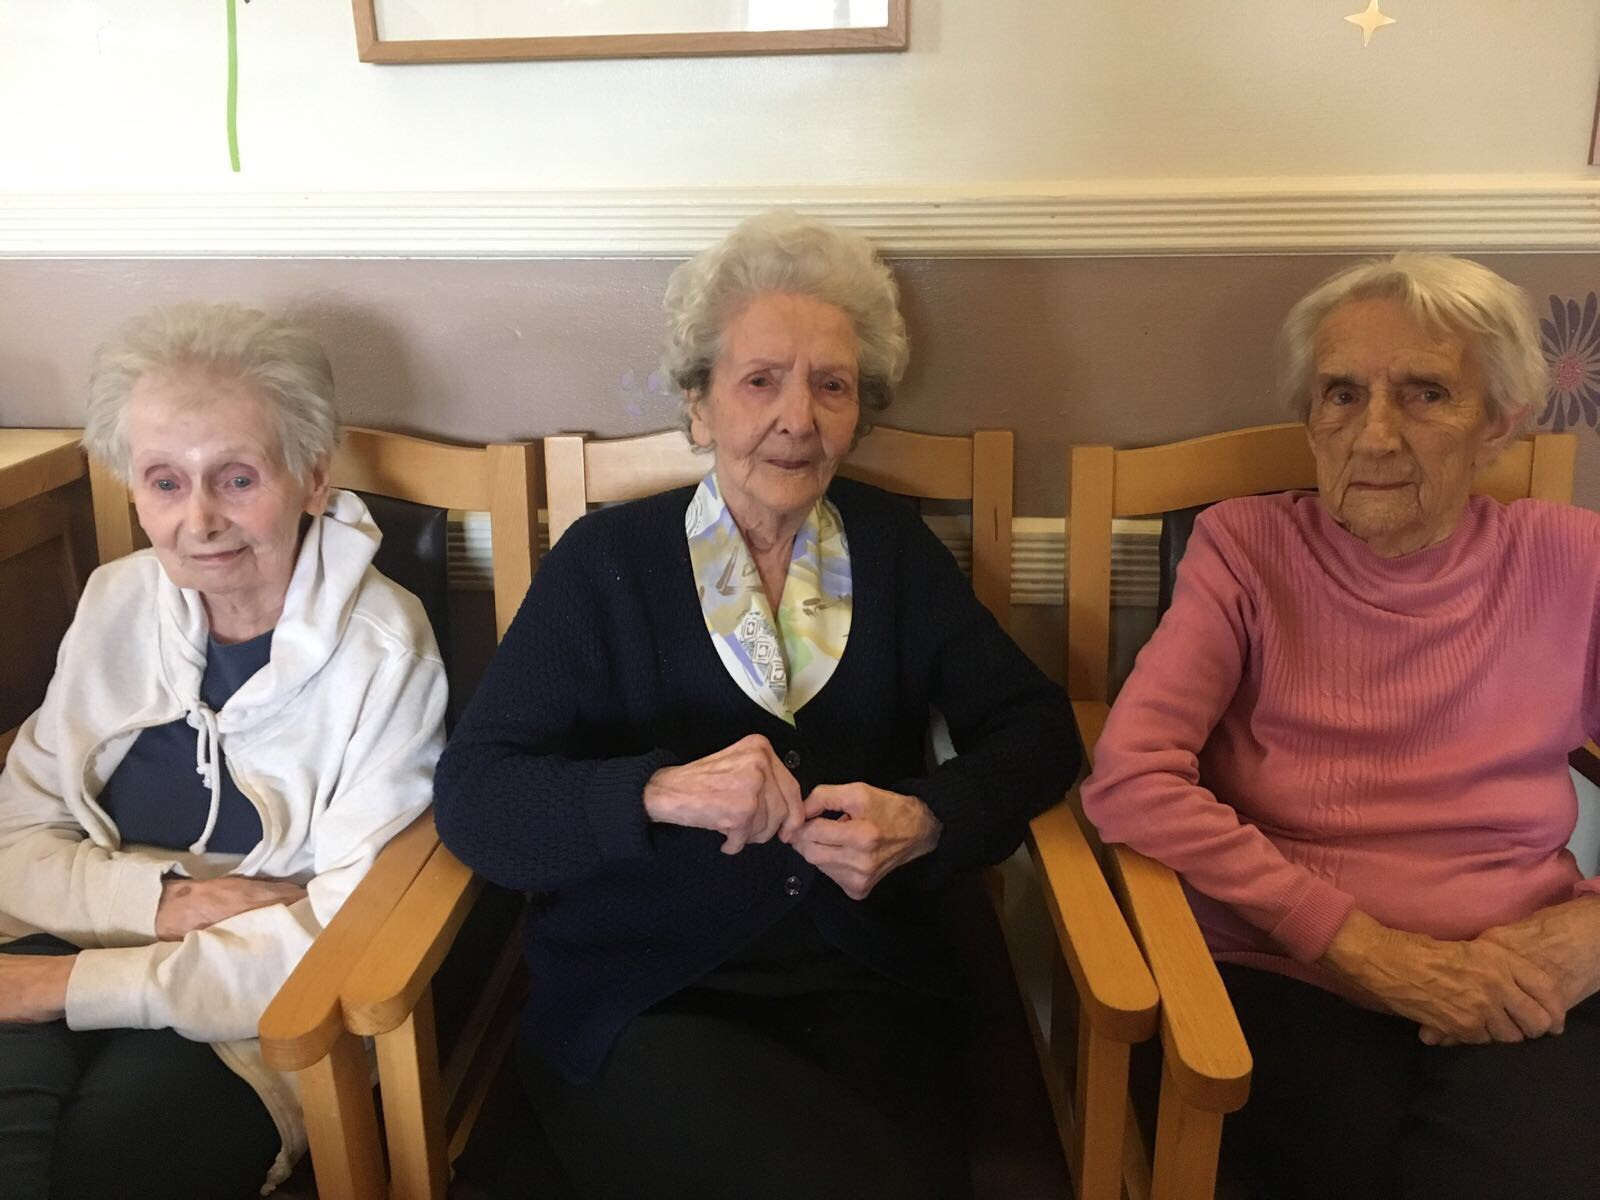 Beautiful.: Key Healthcare is dedicated to caring for elderly residents in safe. We have multiple dementia care homes including our care home middlesbrough, our care home St. Helen and care home saltburn. We excel in monitoring and improving care levels.